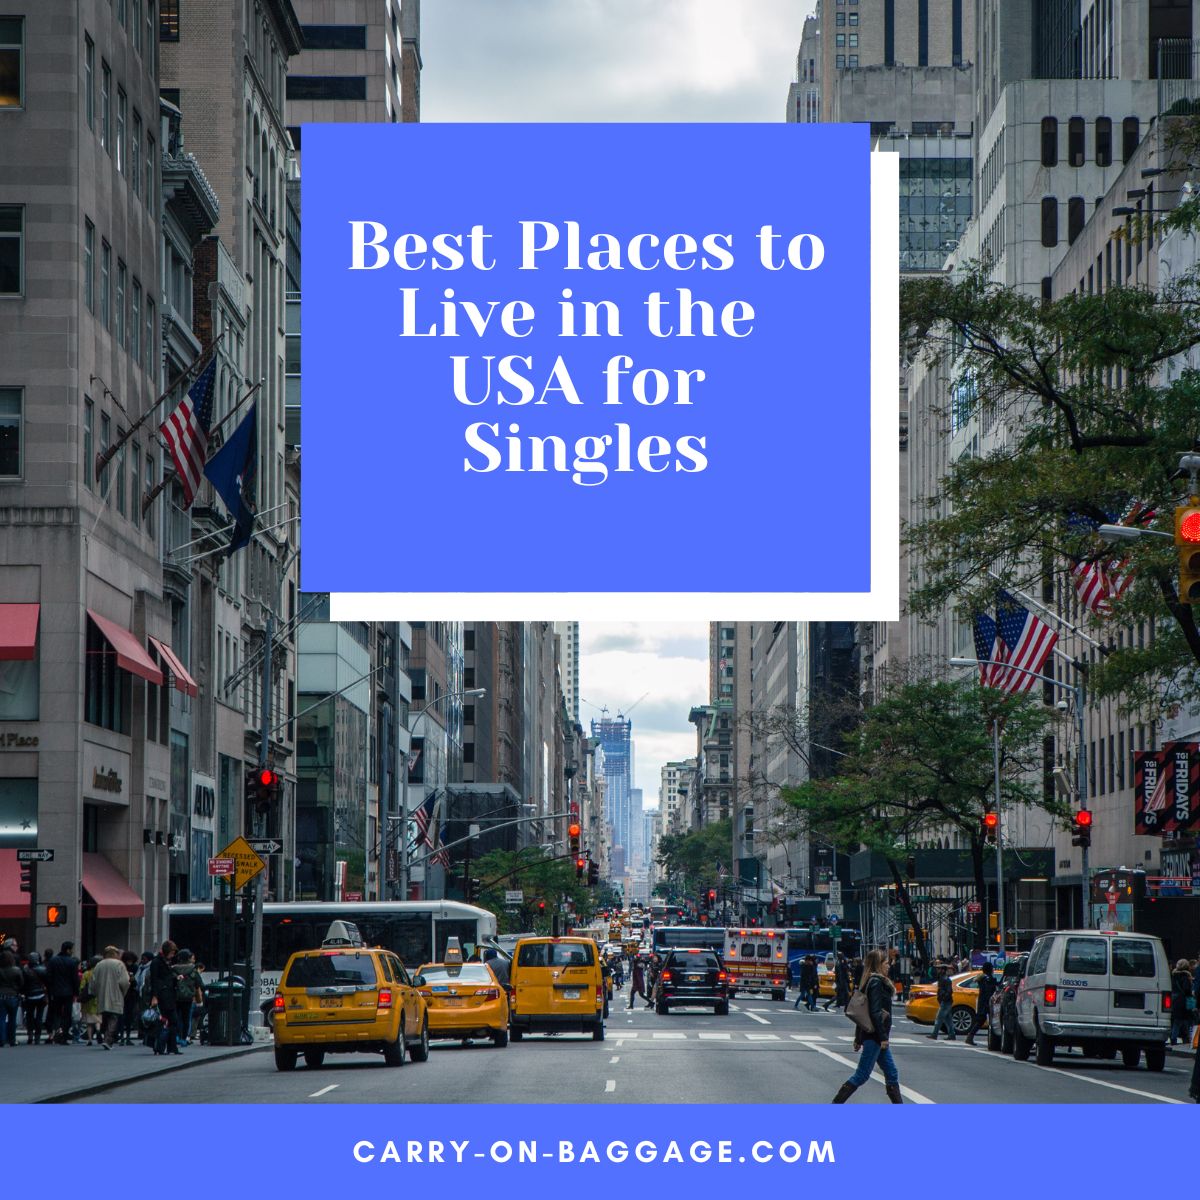 Best Places to Live in the USA for Singles